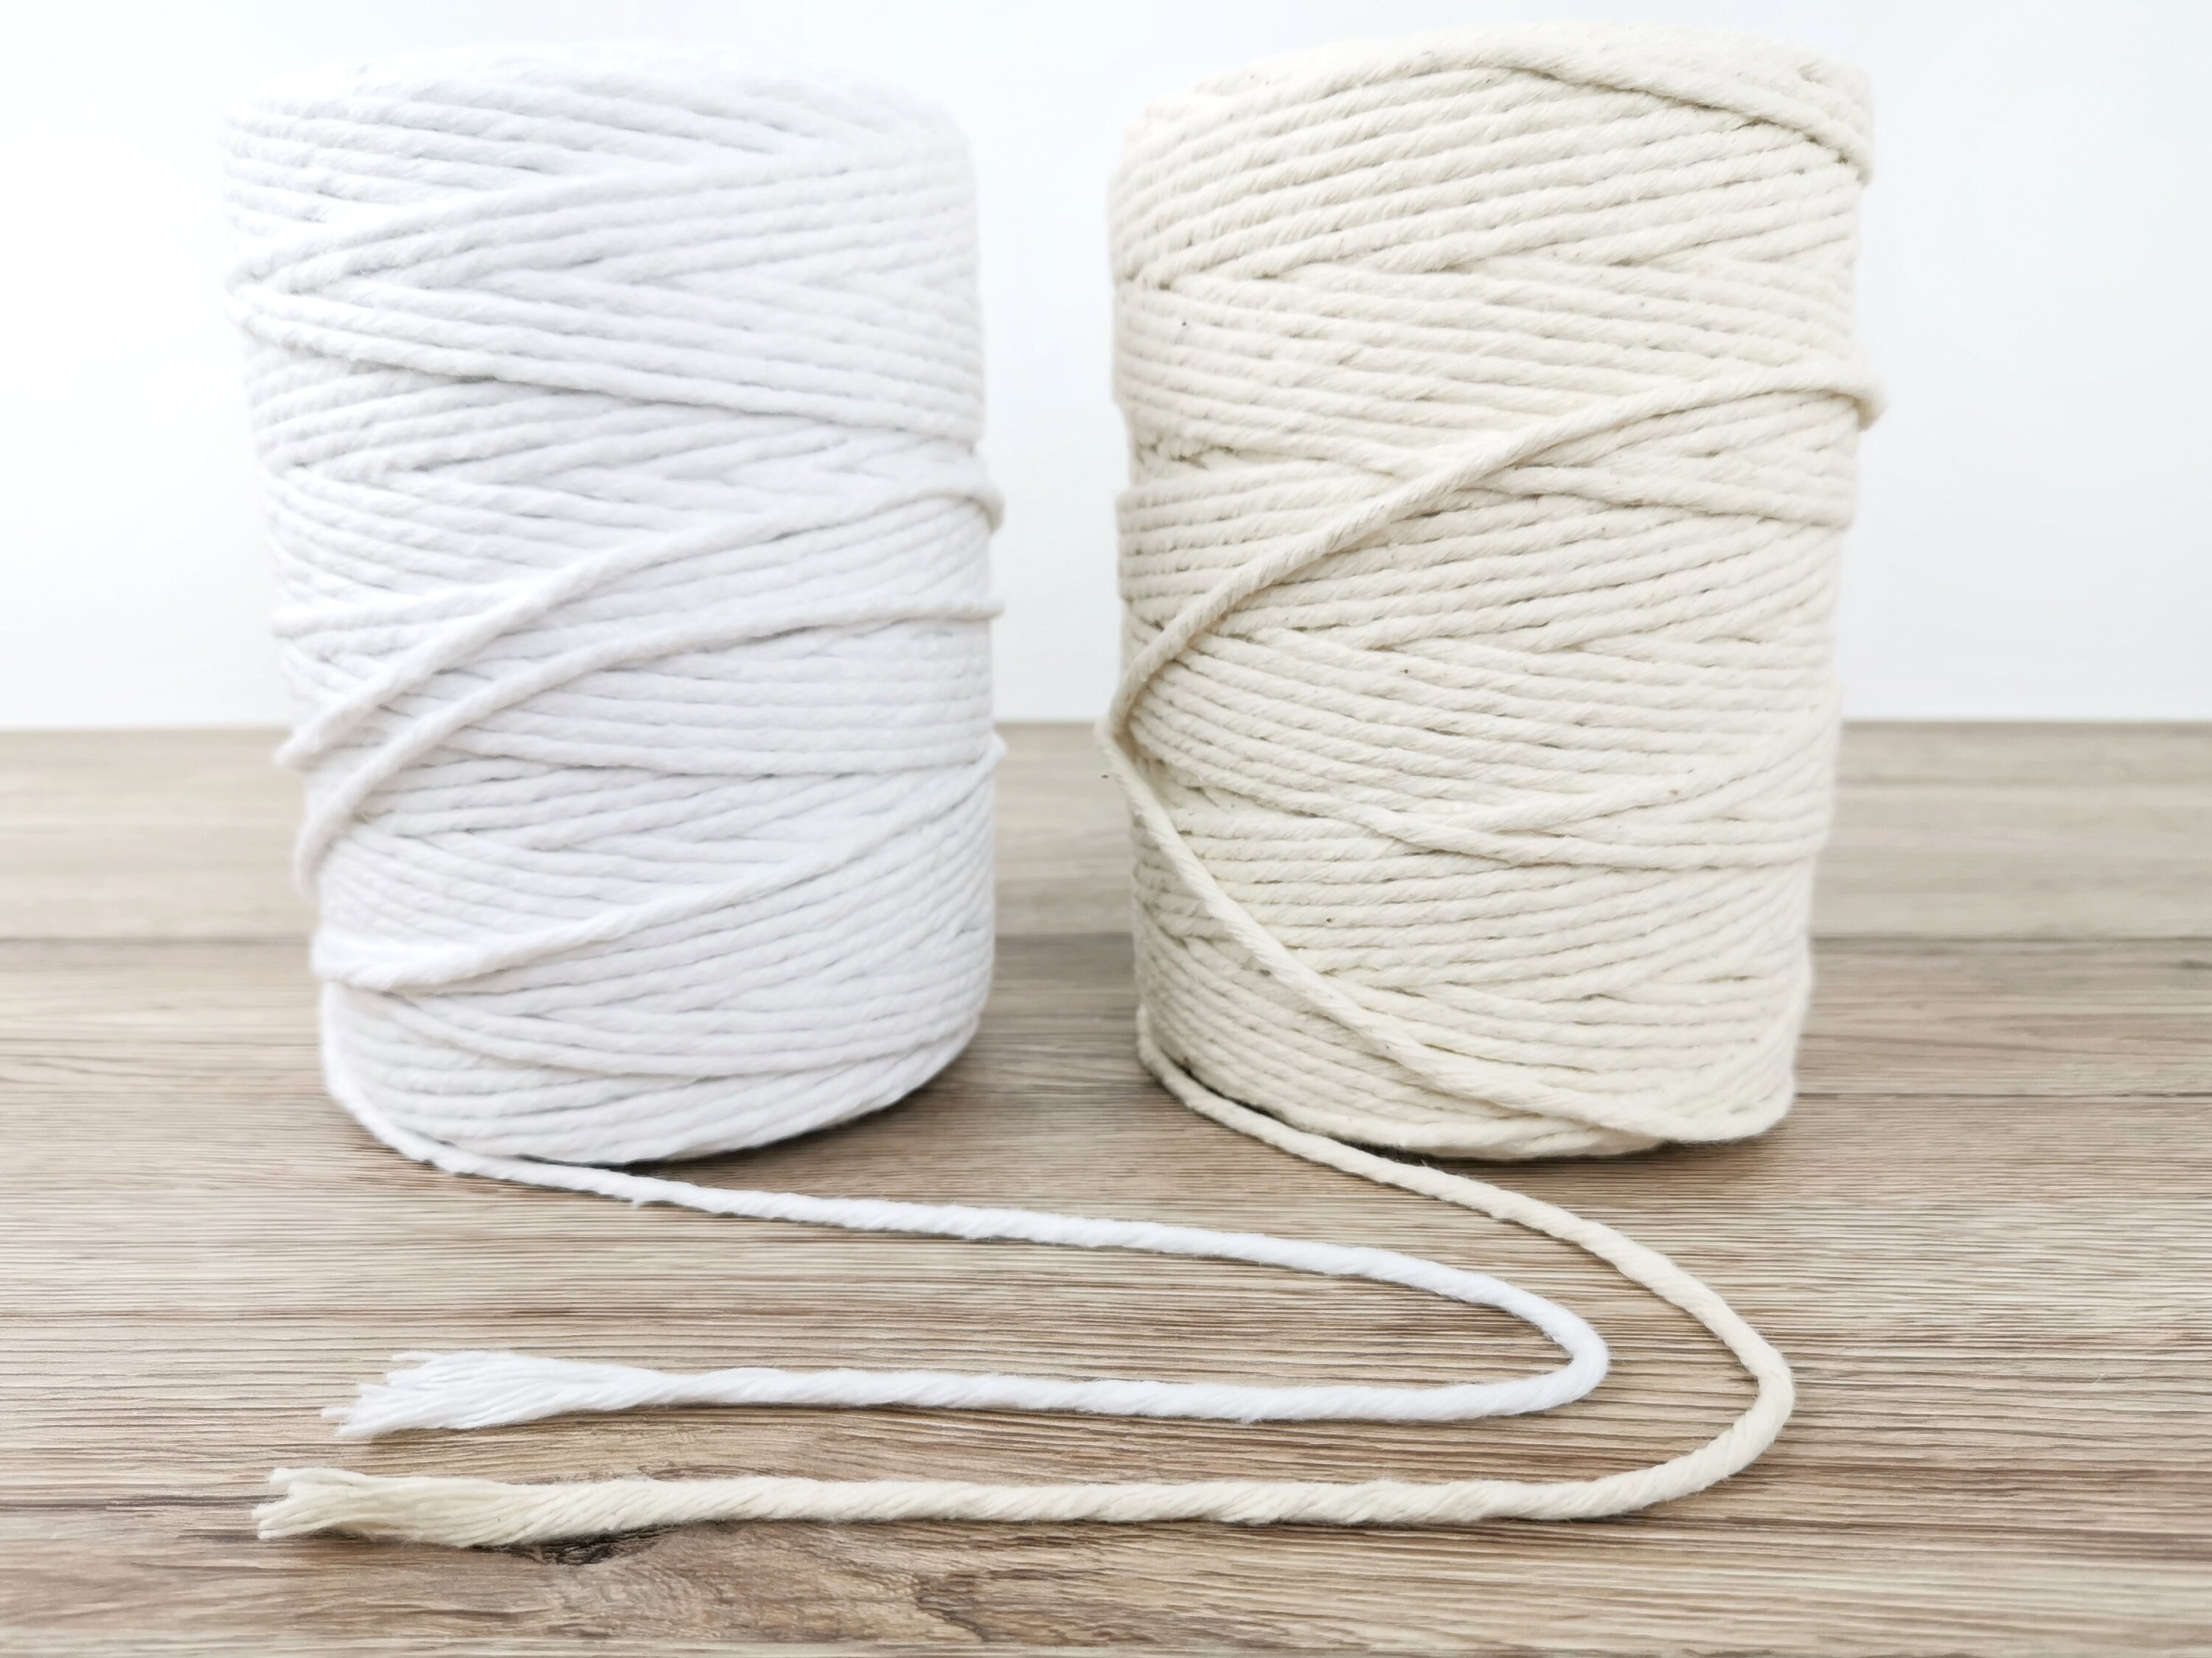 Whimsy Designs Macrame Cord 4mm single twist 1 ply Rope 240 metres 100/% Cotton Reel natural 1 ply 4mm wall hangings plant hangers